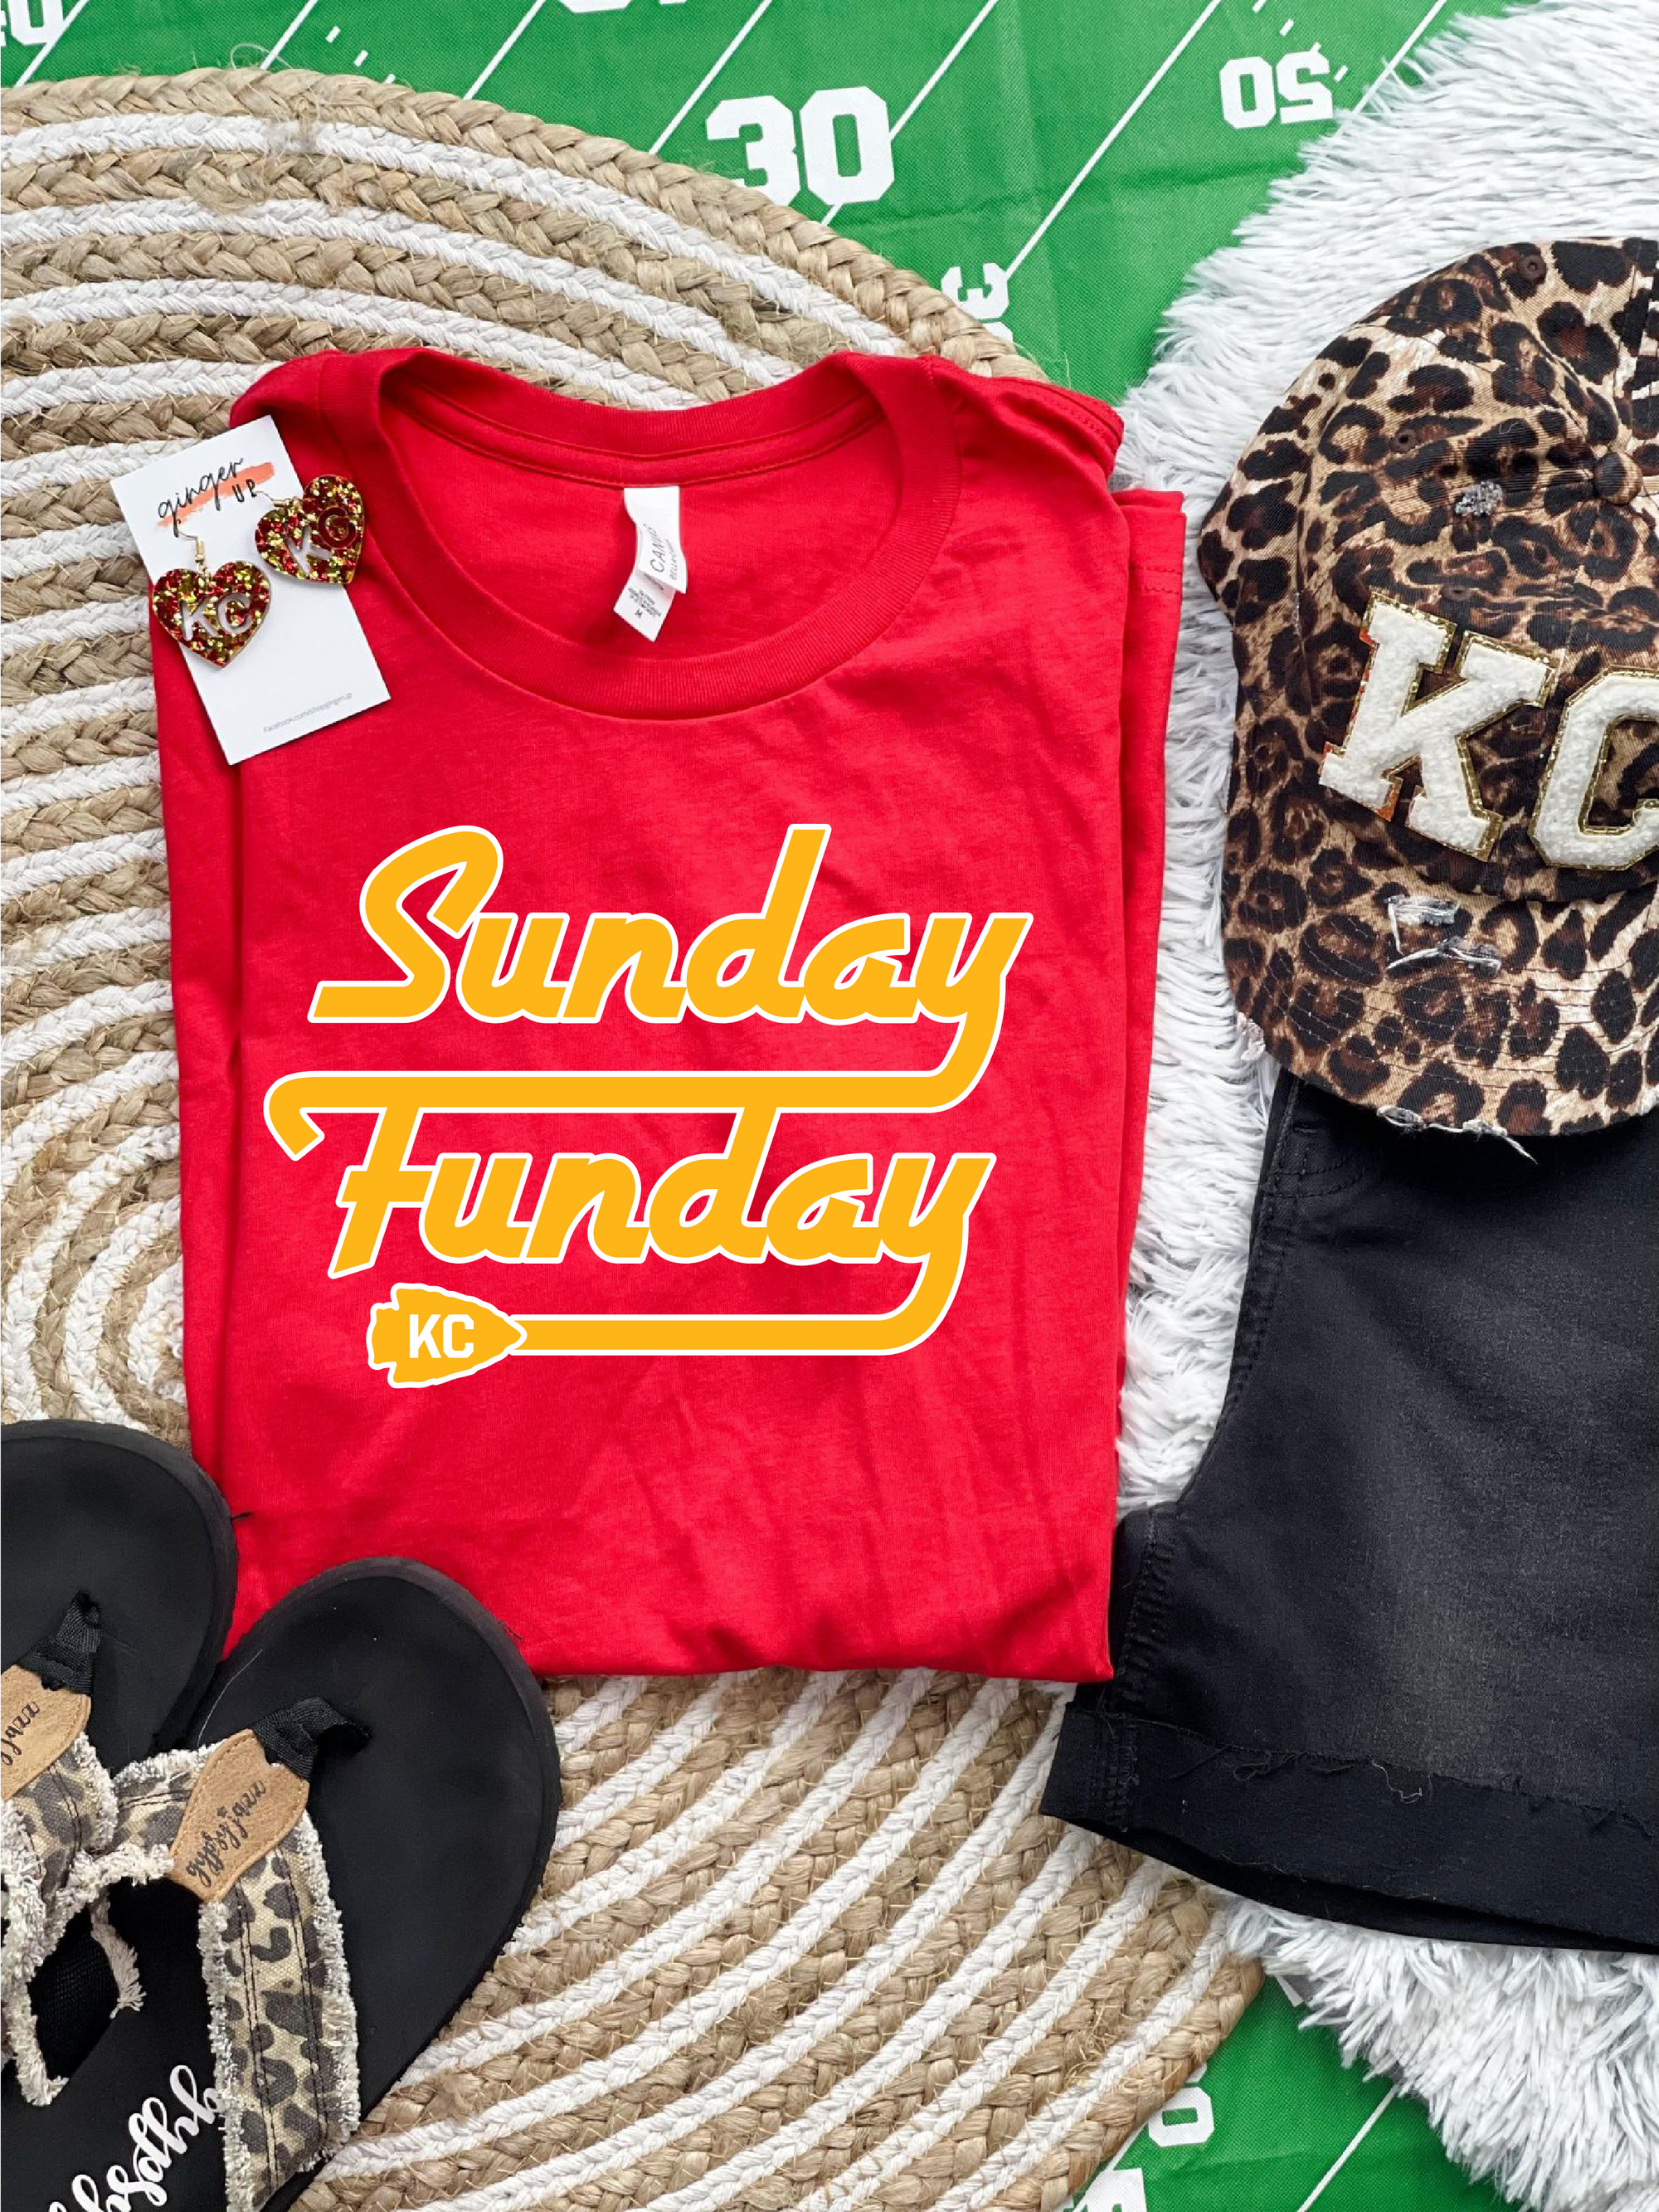 Sunday Funday on Red Tee - The Red Rival